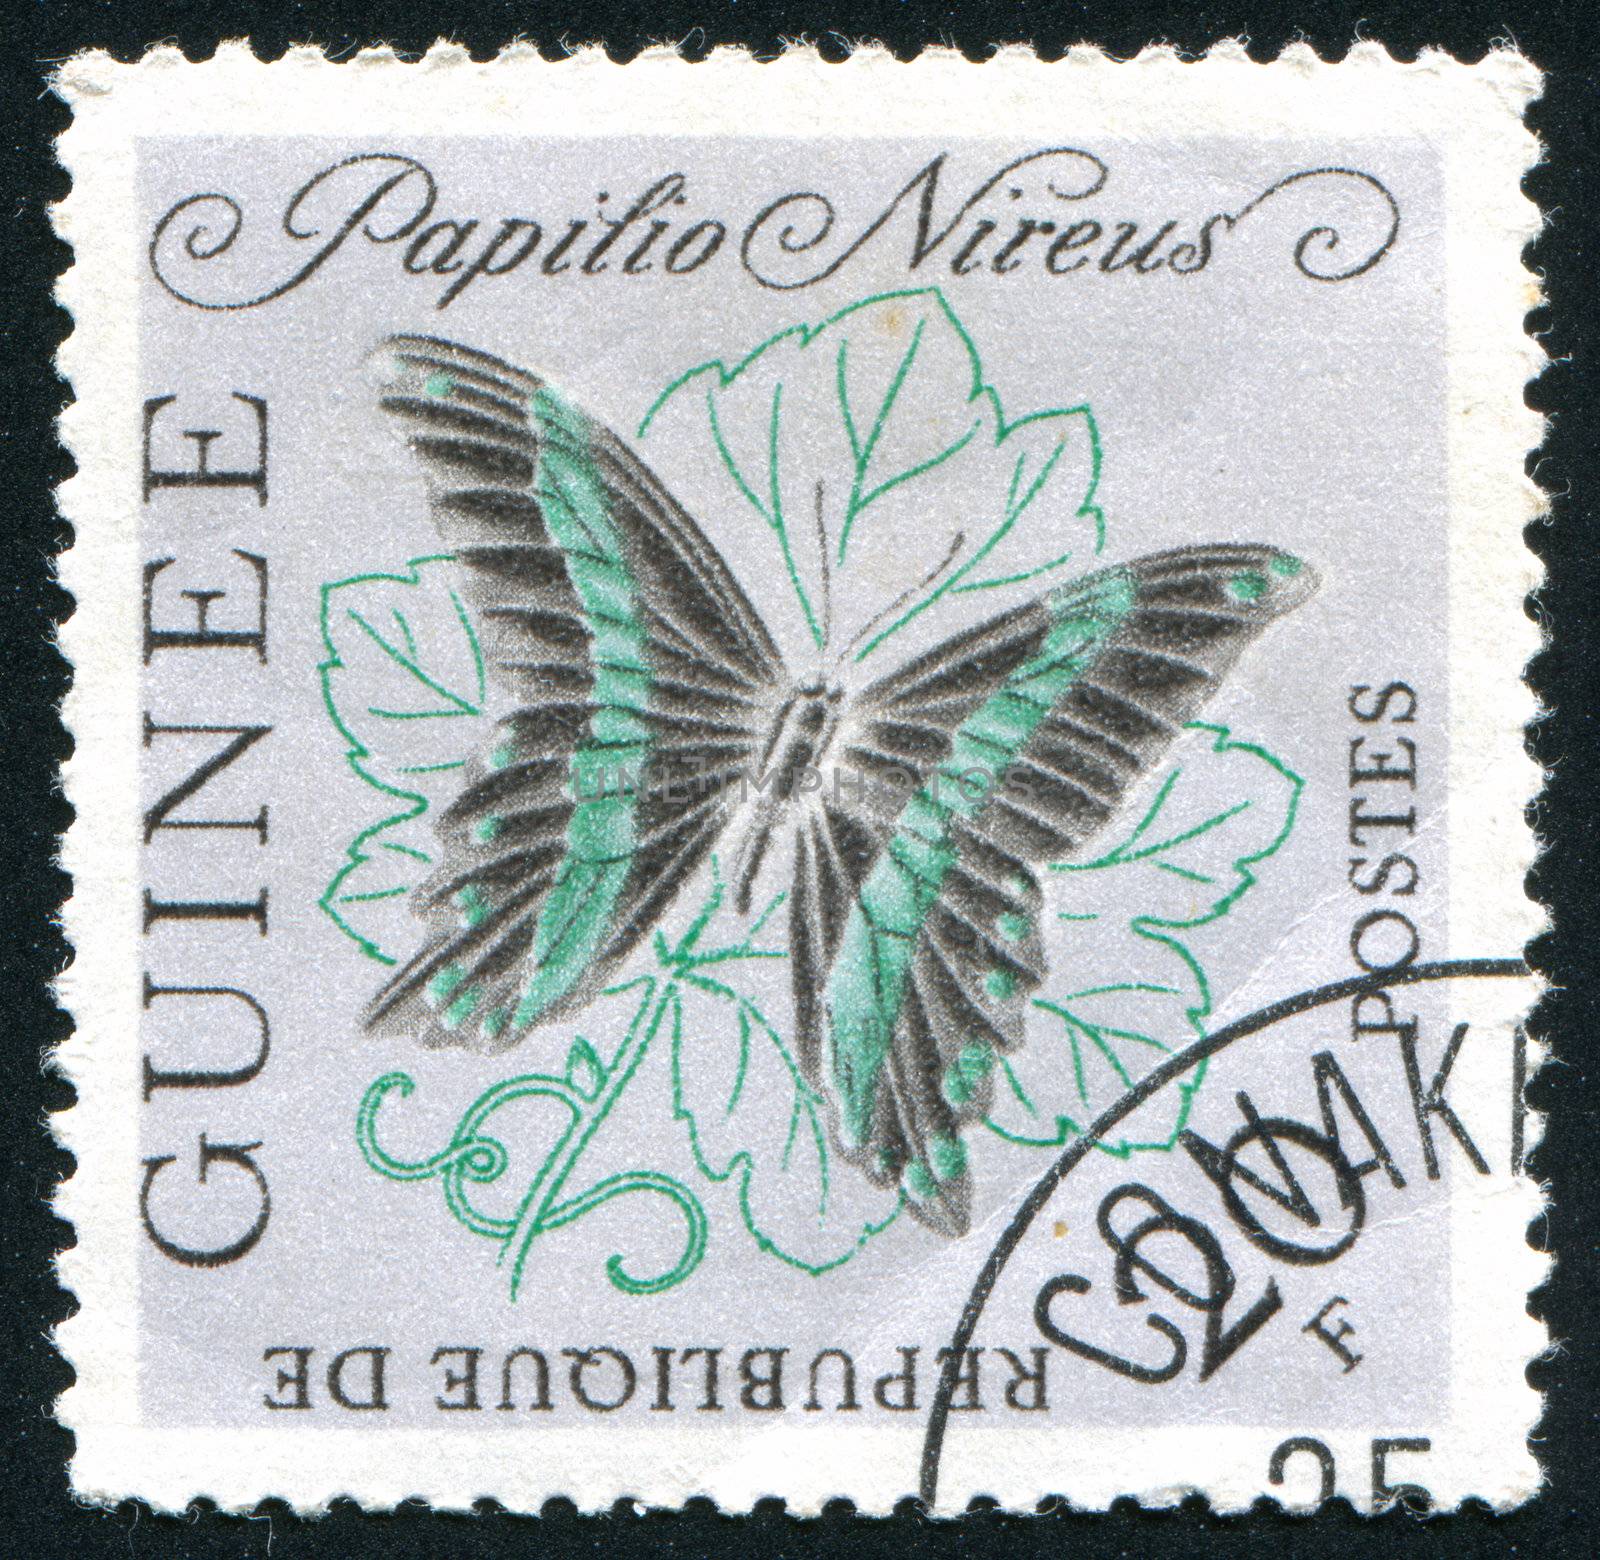 GUINEA - CIRCA 1972:   stamp printed by Guinea,  shows butterfly, circa 1972.